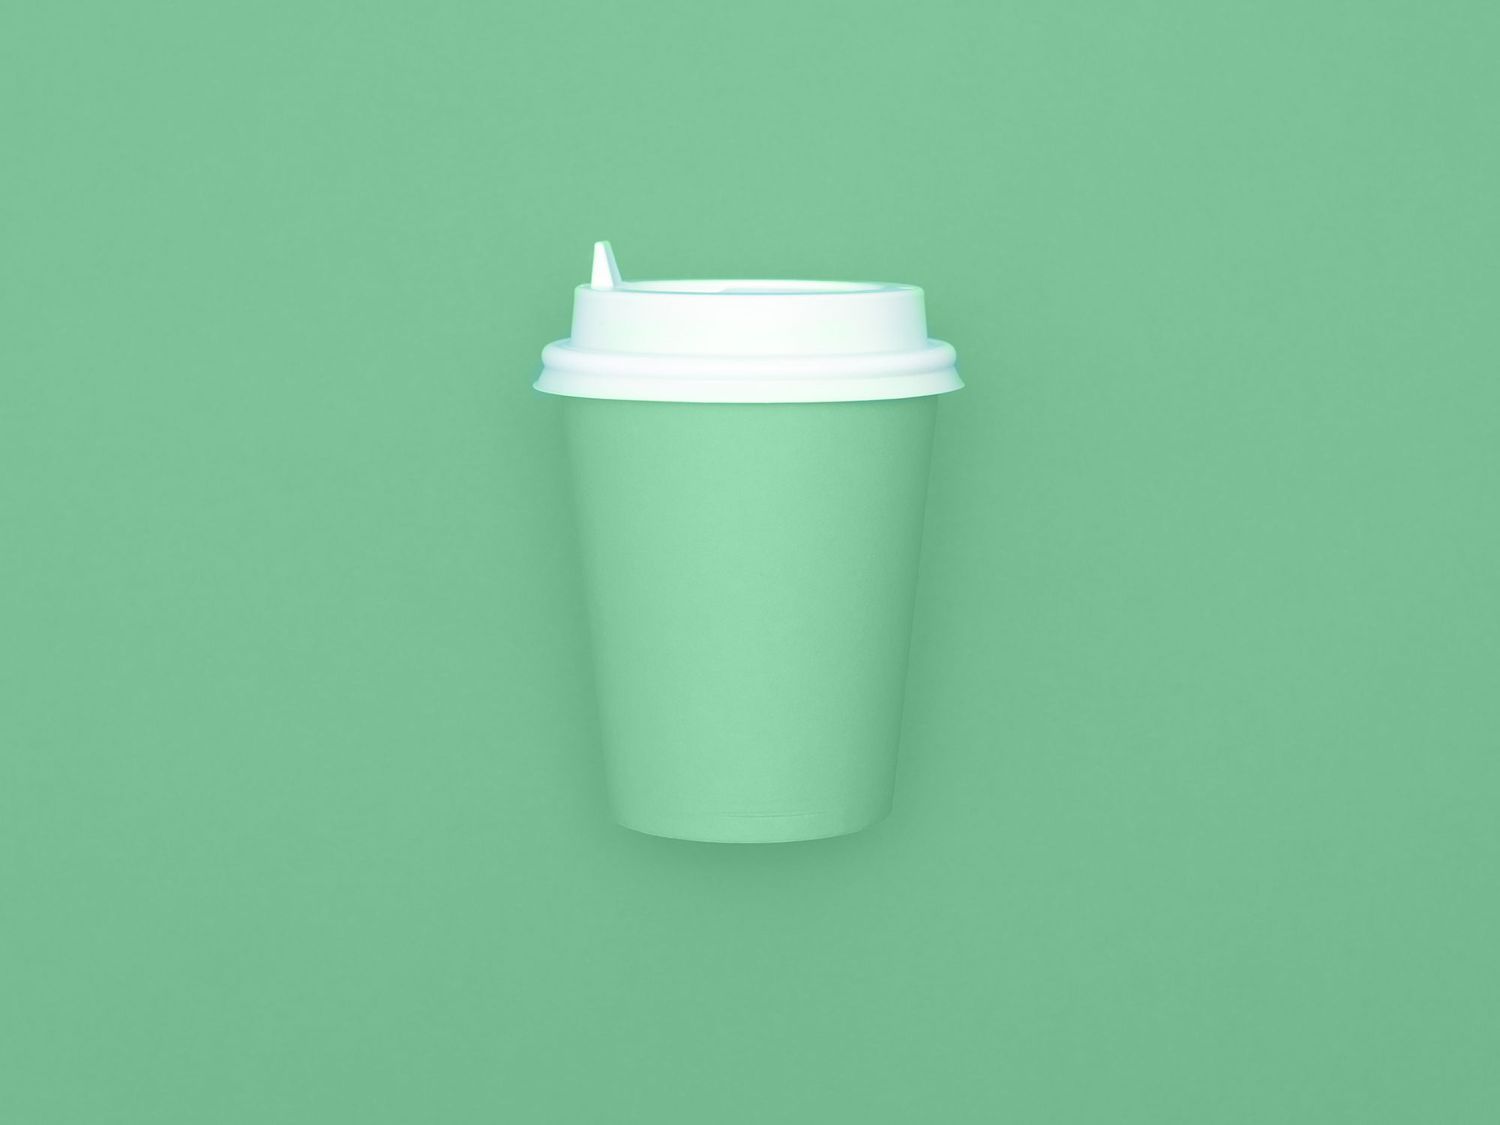 Reusable eco friendly bamboo cup for take away coffee on mint background. Space for text. Flat lay, top view. Bring your own cup concept. Zero waste, sustainable lifestyle.